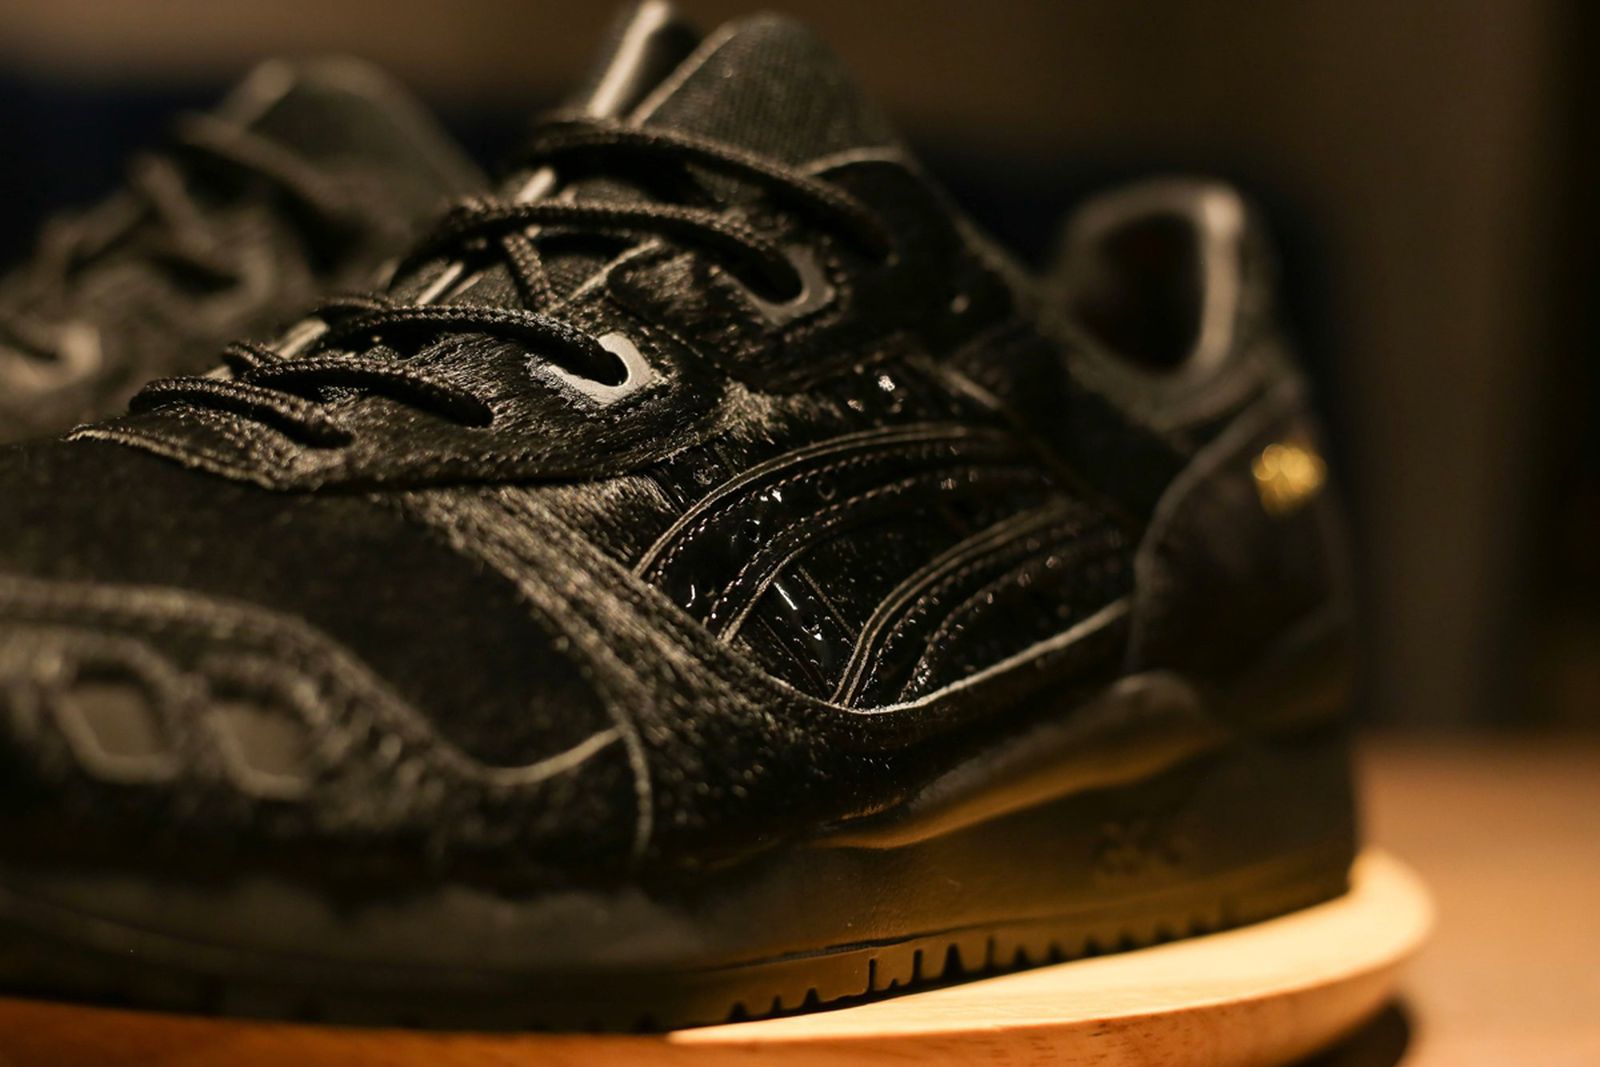 atmos x ASICS GEL-LYTE III OG Beef Shoes Collab, Release Details